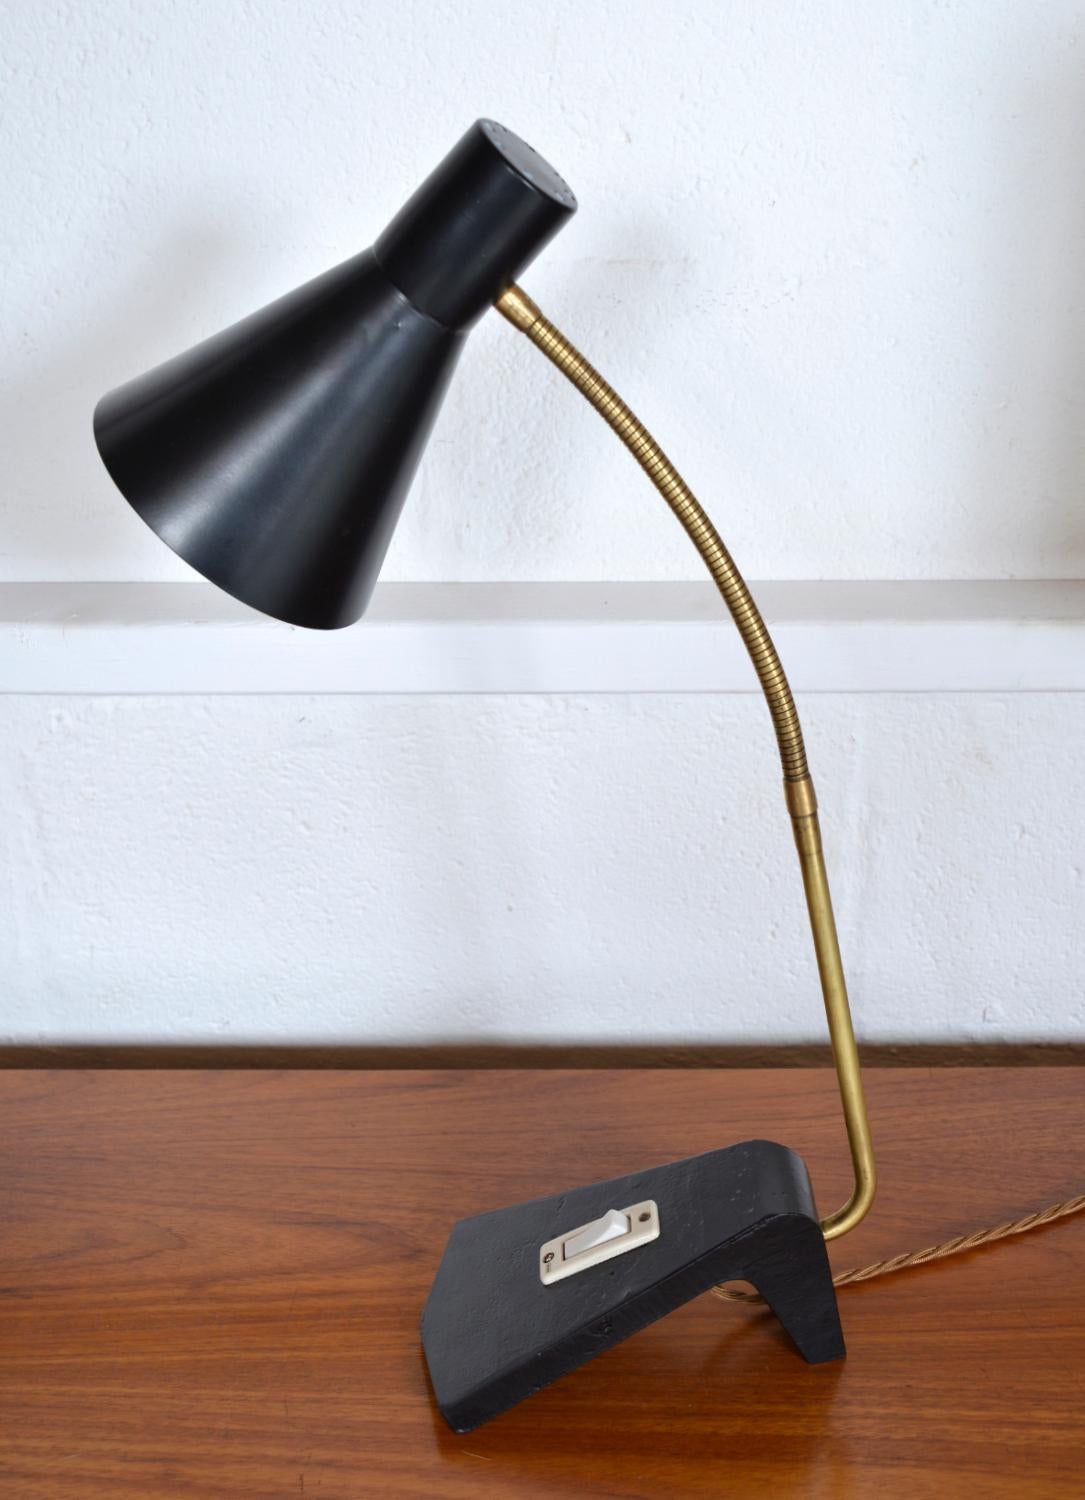 A very neat Midcentury Swedish swan neck desk lamp with a black aluminium shade, brass swan neck and unusually shaped, heavy cast steel base with switch. The lamp holds well in a variety of positions, which makes it the perfect light for reading, or